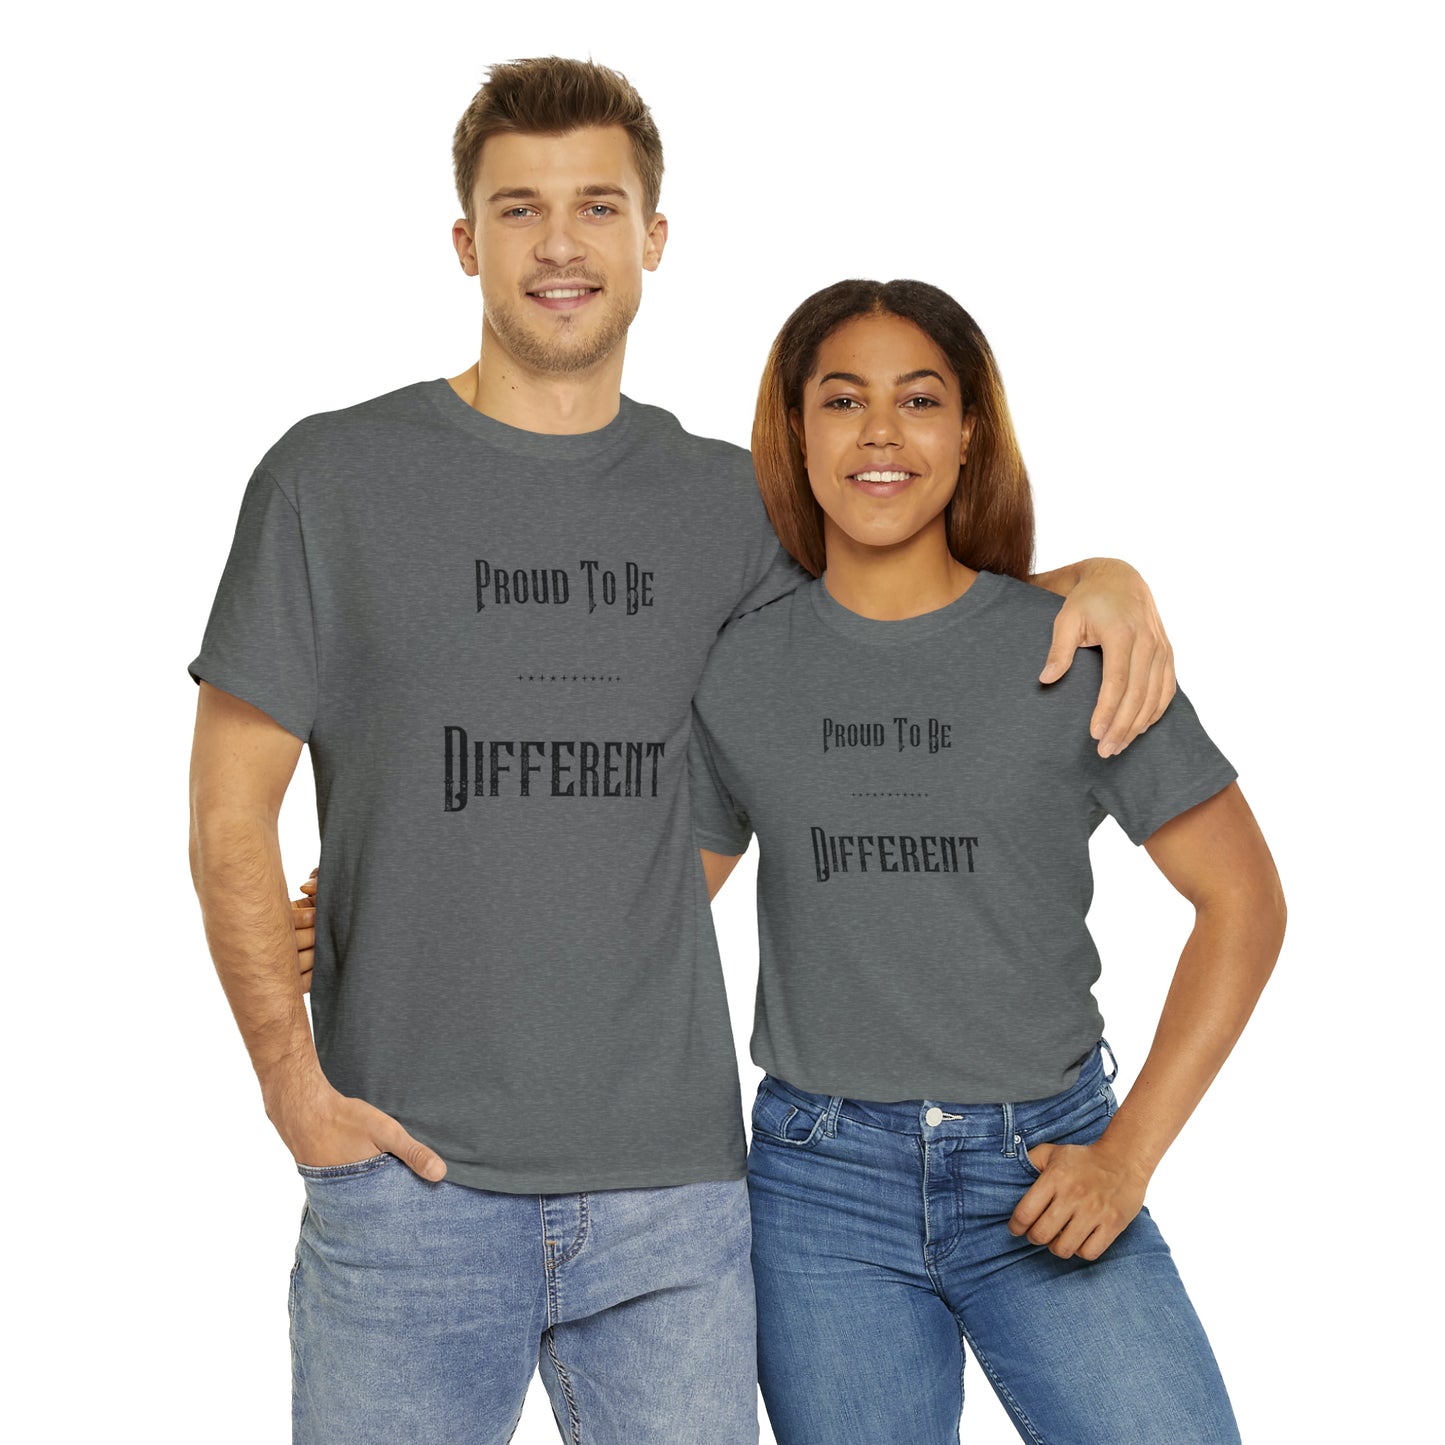 "Proud to Be Different" T-Shirt - Weave Got Gifts - Unique Gifts You Won’t Find Anywhere Else!